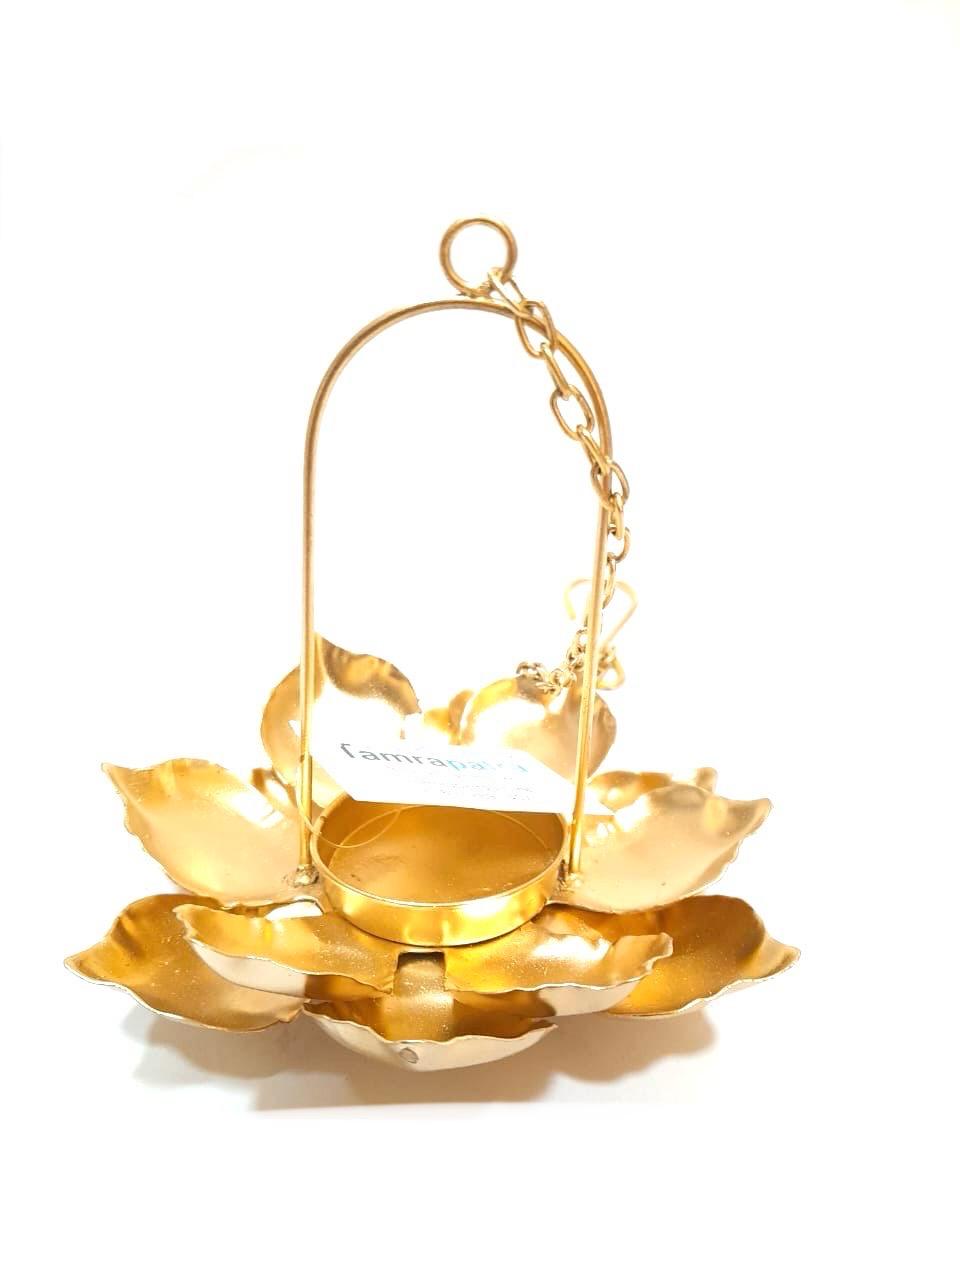 Butterfly Lotus Metal Hanging With Chain Shiny Gold For All Occasions By Tamrapatra